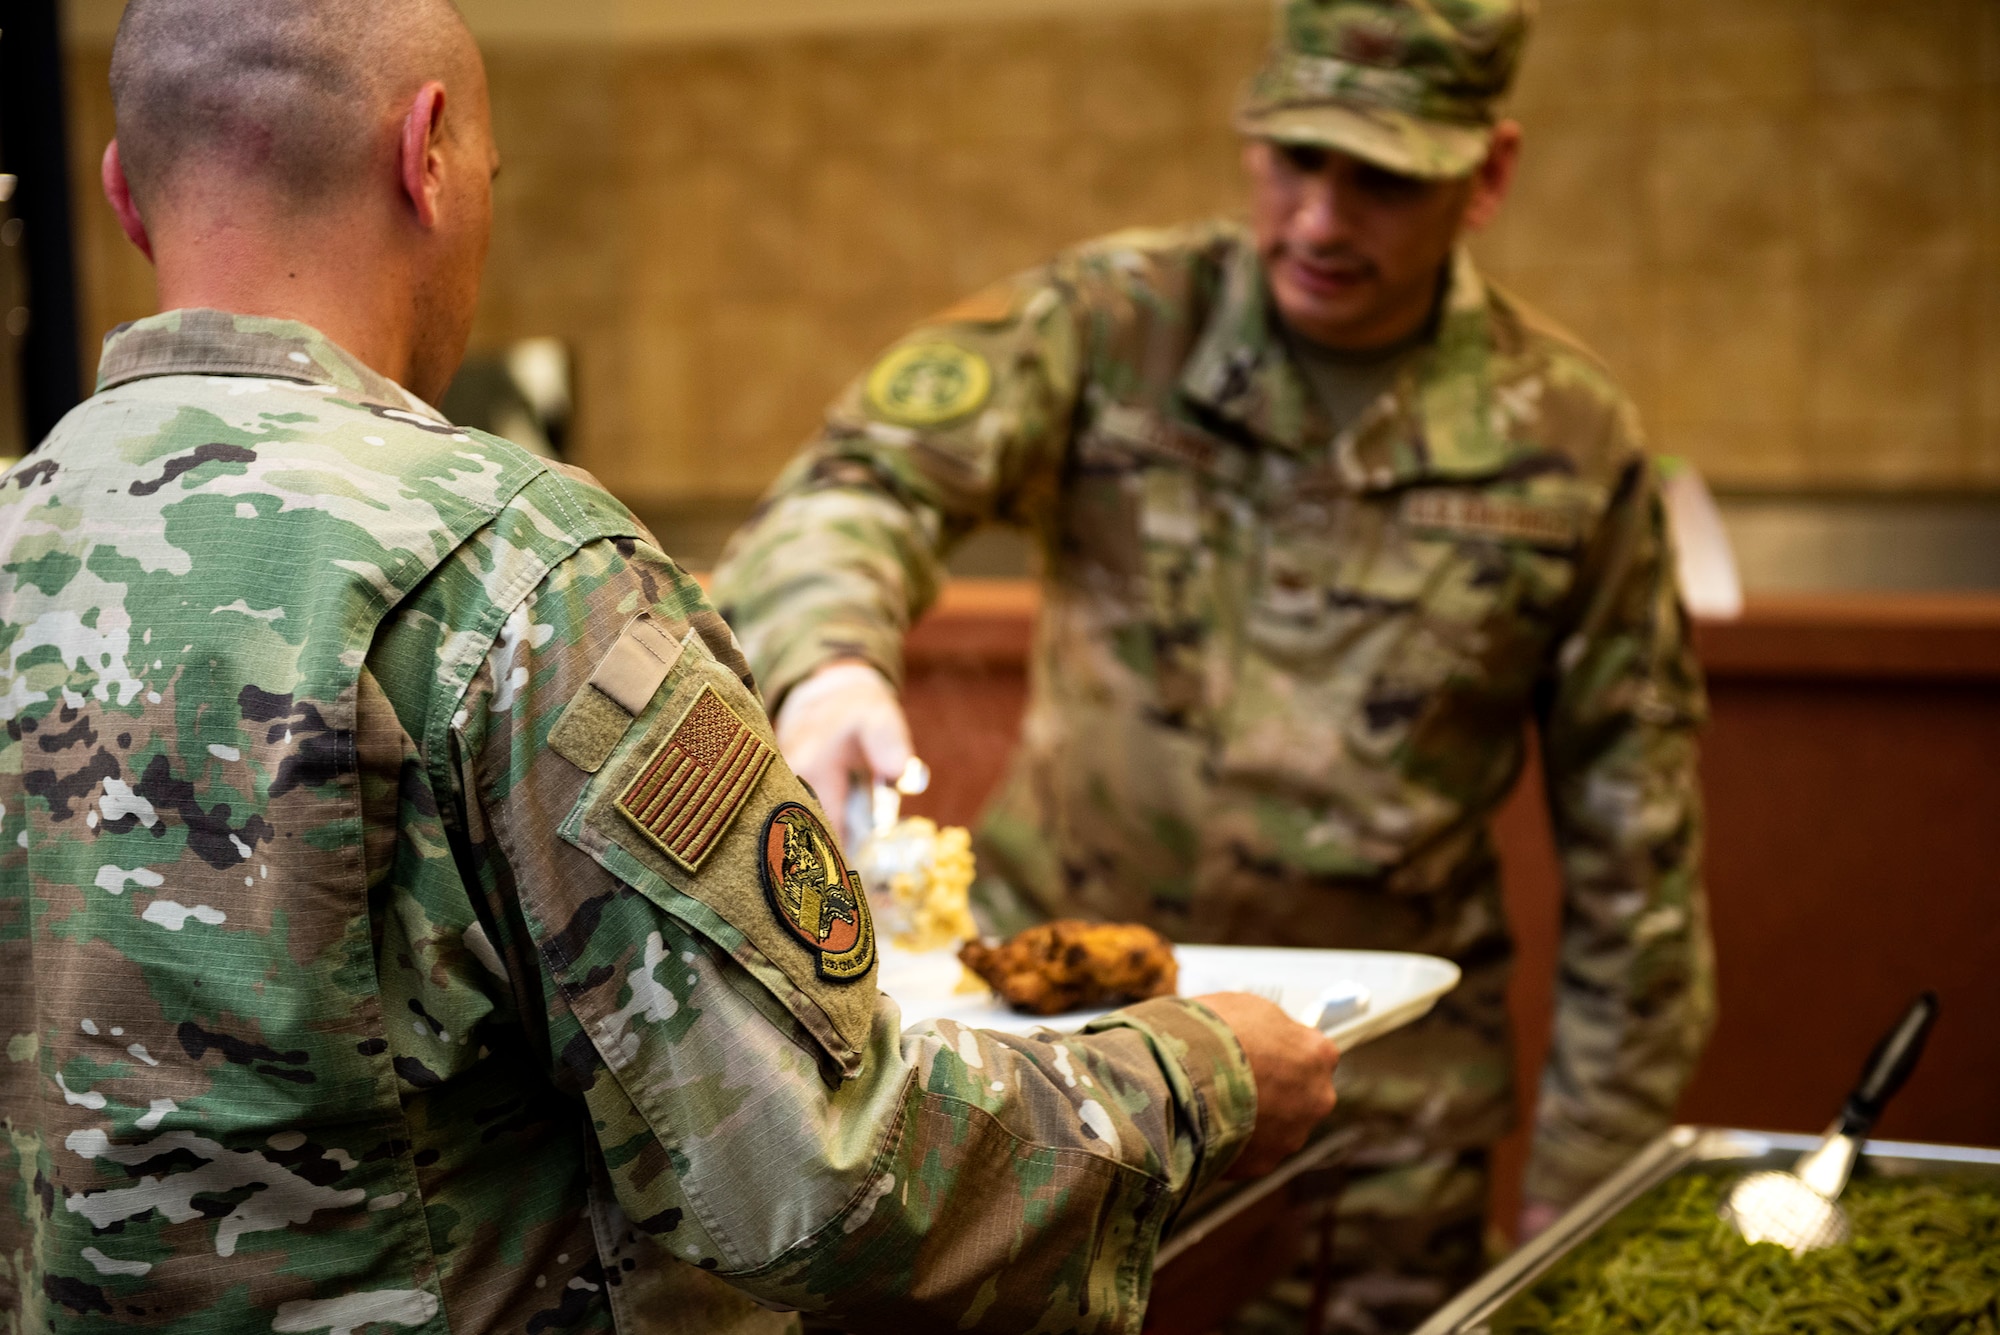 Lt. Col. Eric Rosenlof, 23d Civil Engineer Squadron commander, left, is served food during a Deployed Spouses Dinner Sept. 17, 2019, at Moody Air Force Base, Ga. The monthly event is a free dinner at Georgia Pines Dining Facility designed as a ‘thank you’ for each families’ support and sacrifice. The dinner, occurring on every third Tuesday of the month, provides an opportunity for spouses to interact with other families of deployed Airmen, key spouses and unit leadership, as well as provide a break for the spouse while military sponsor is deployed. The next Deployed Spouses Dinner will be Oct. 15. (U.S. Air Force photo by Senior Airman Erick Requadt)